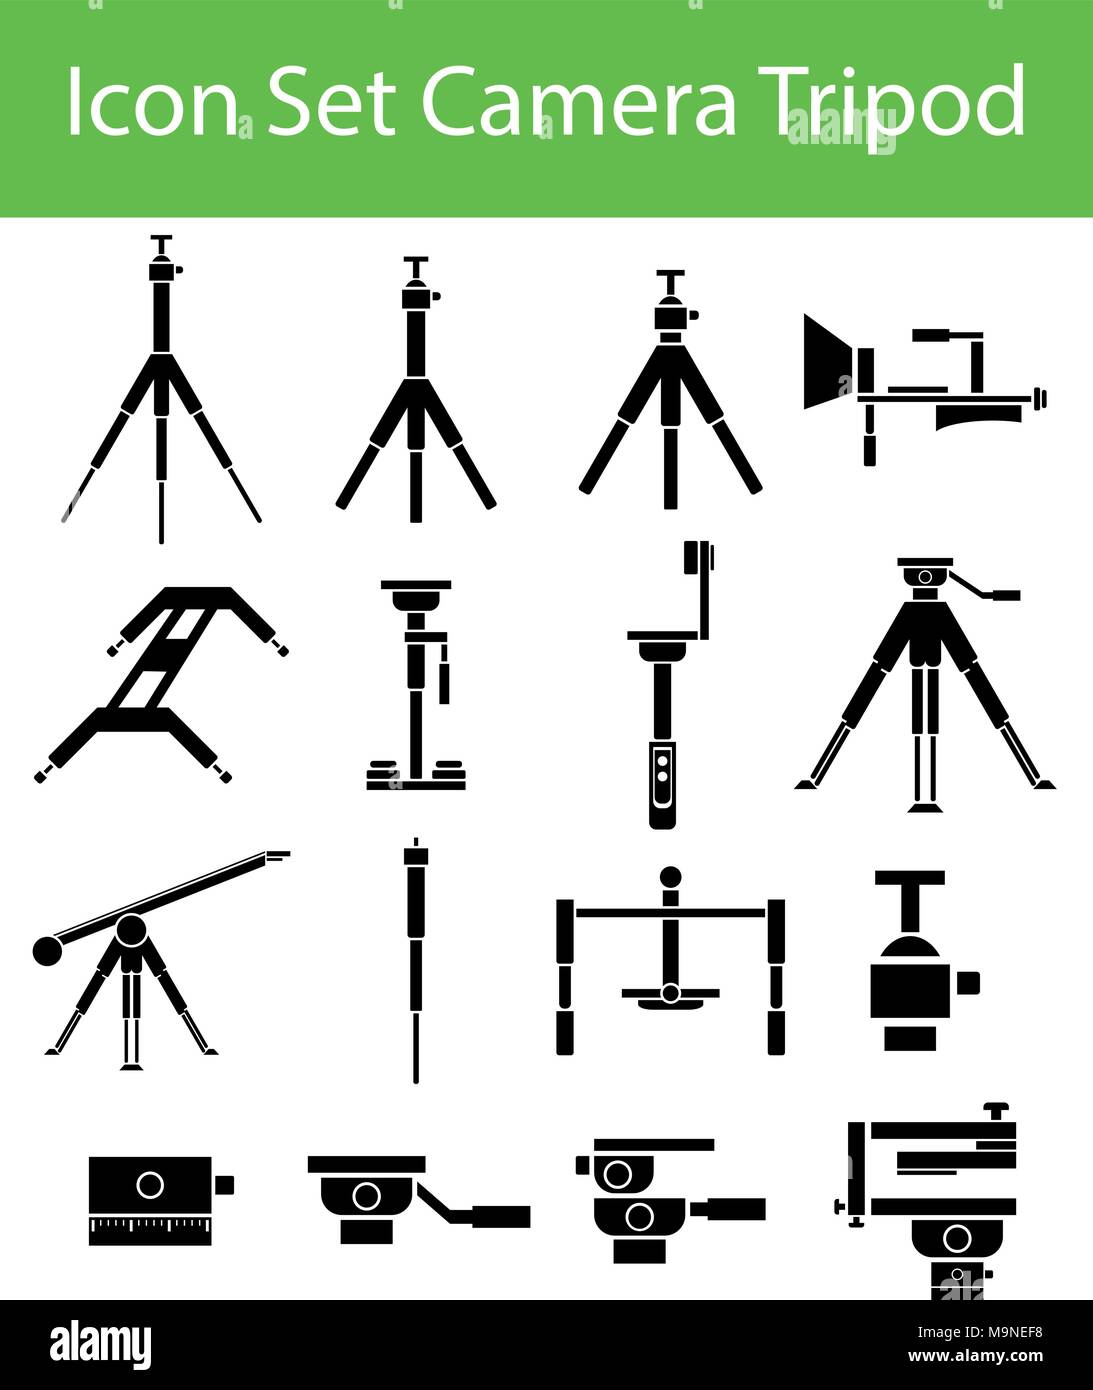 Icon Set Camera Tripod with 16 icons for the creative use in graphic design Stock Vector